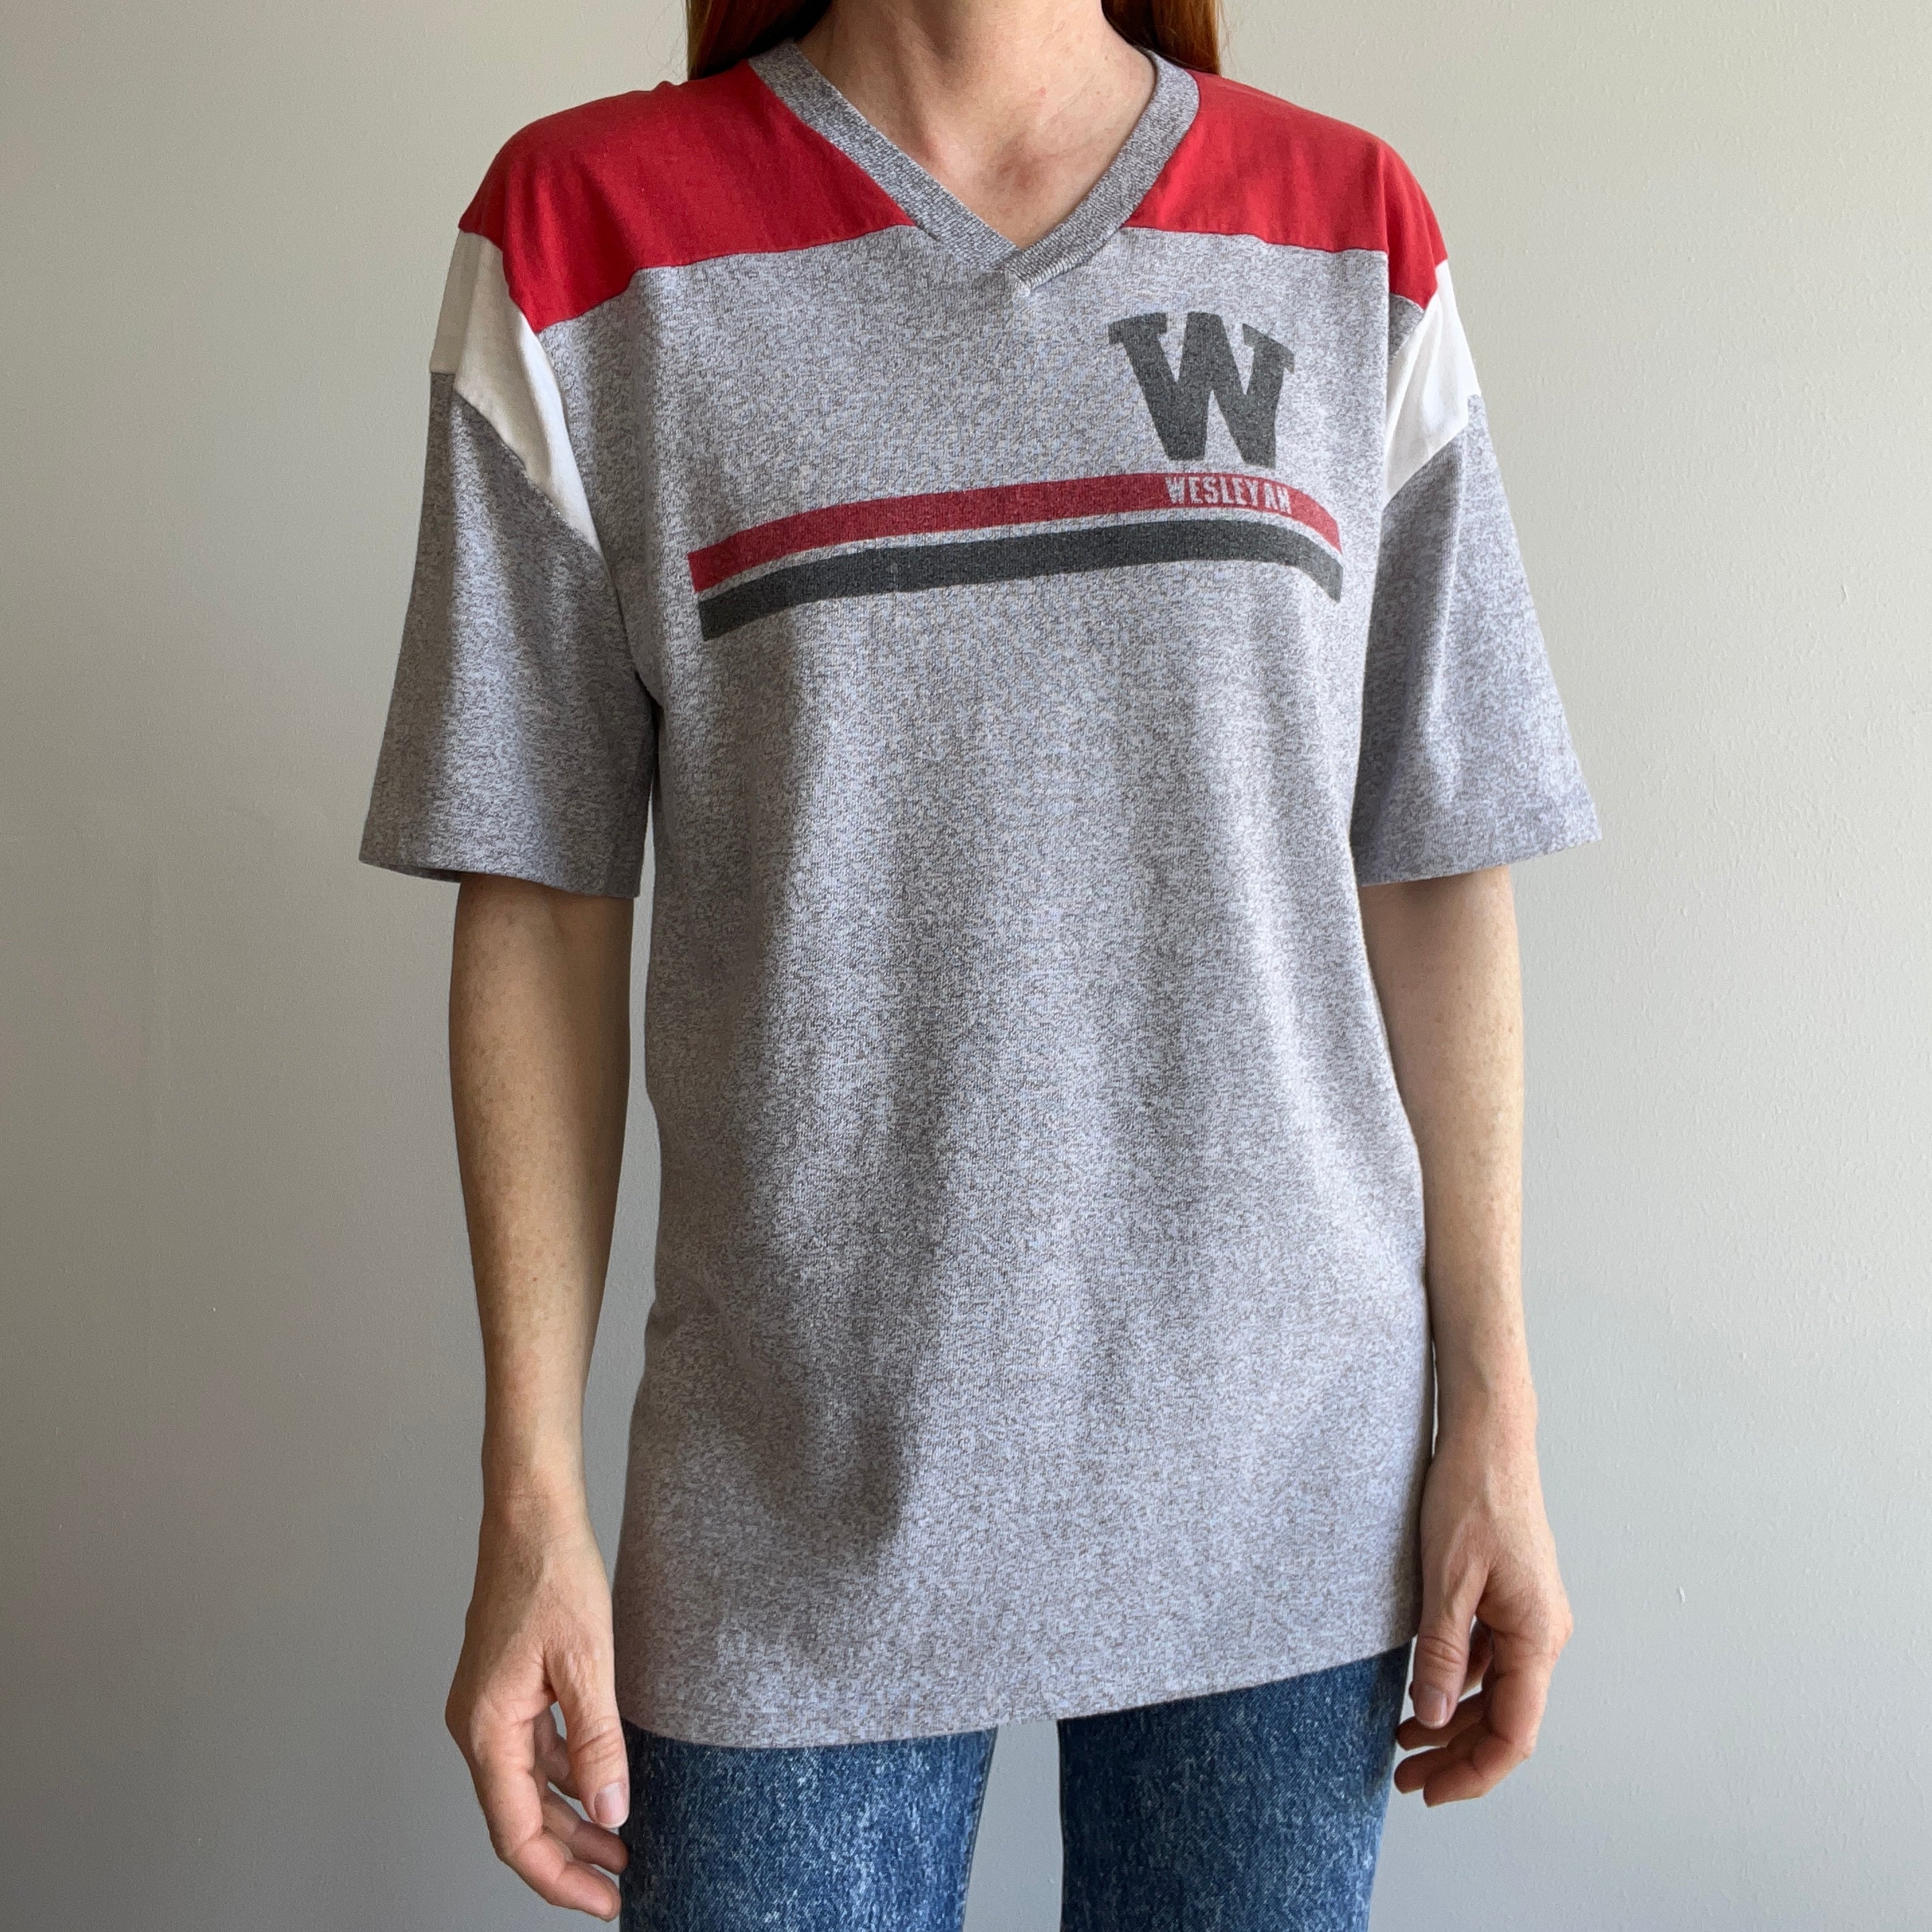 1970s Wesleyan Color Block Football T-Shirt by Champion - Collectible